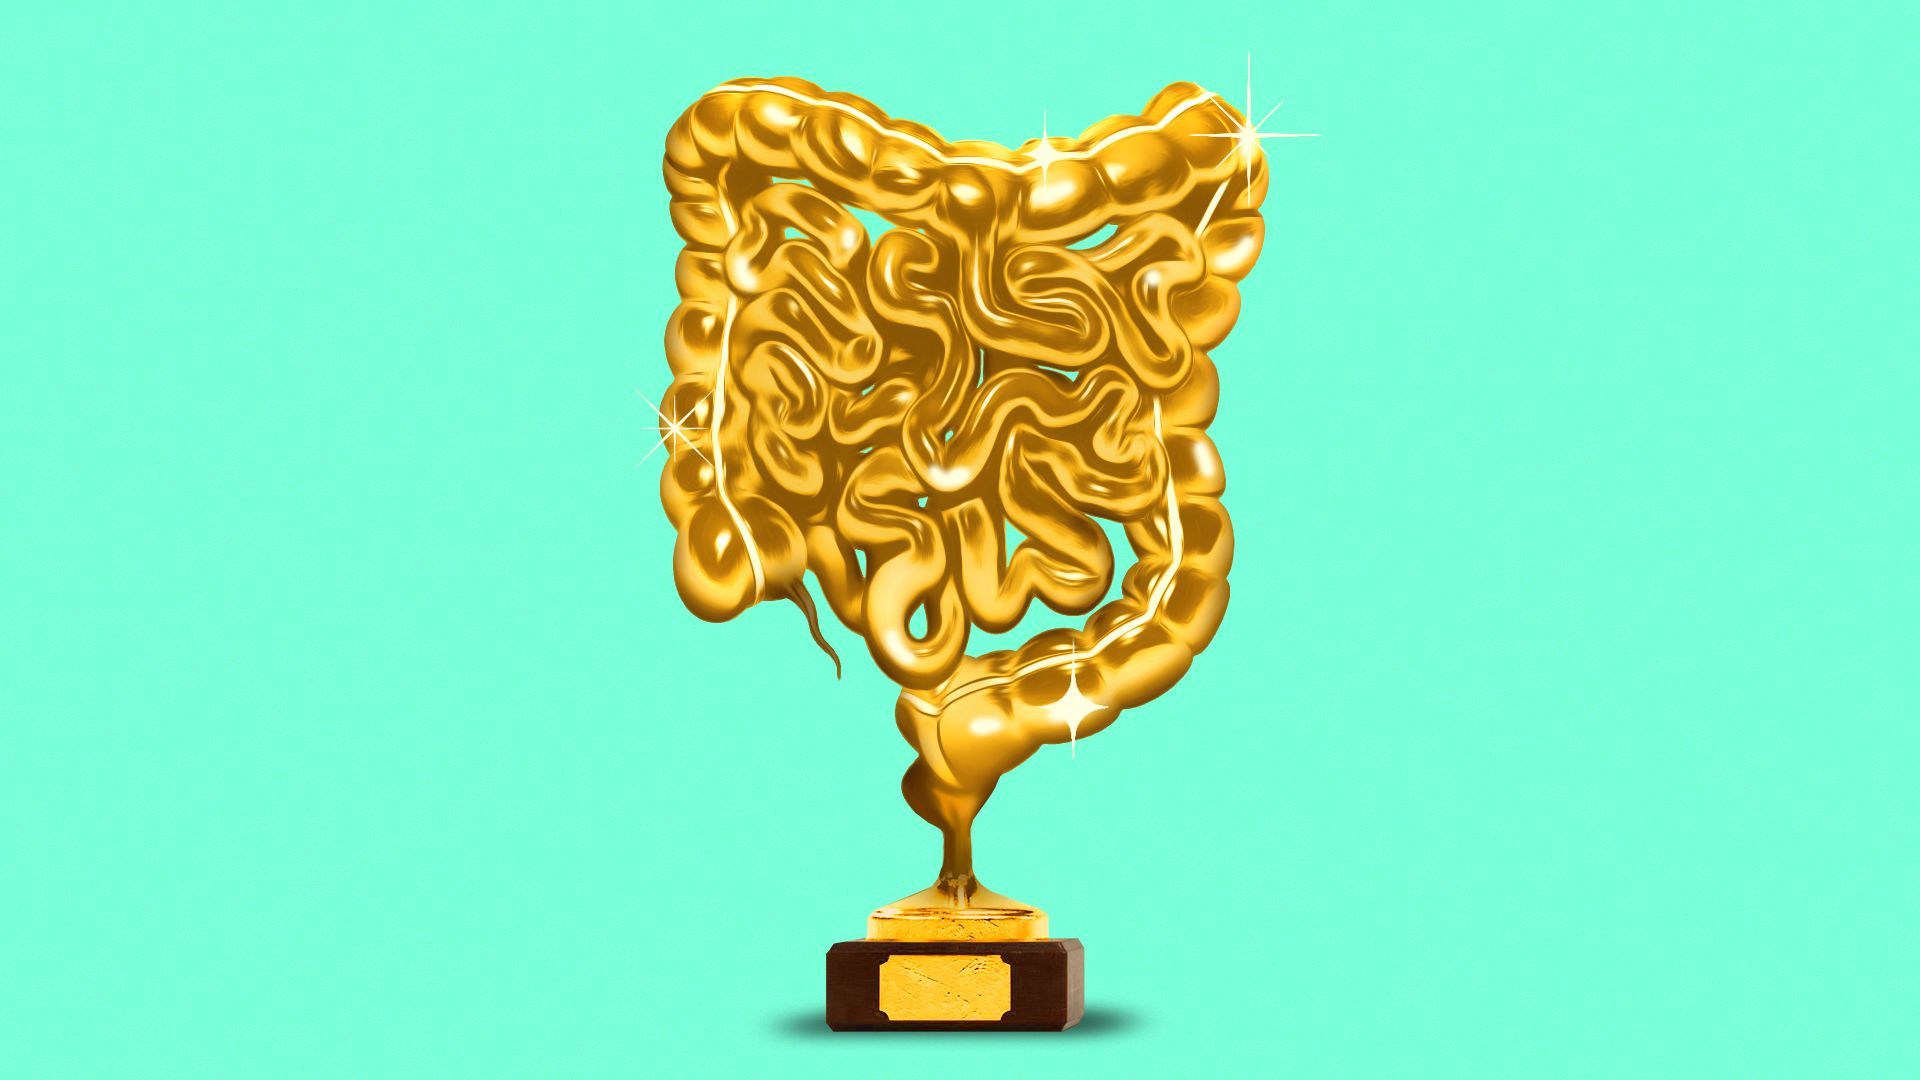 Illustration of a golden trophy shaped like a gastrointestinal tract 